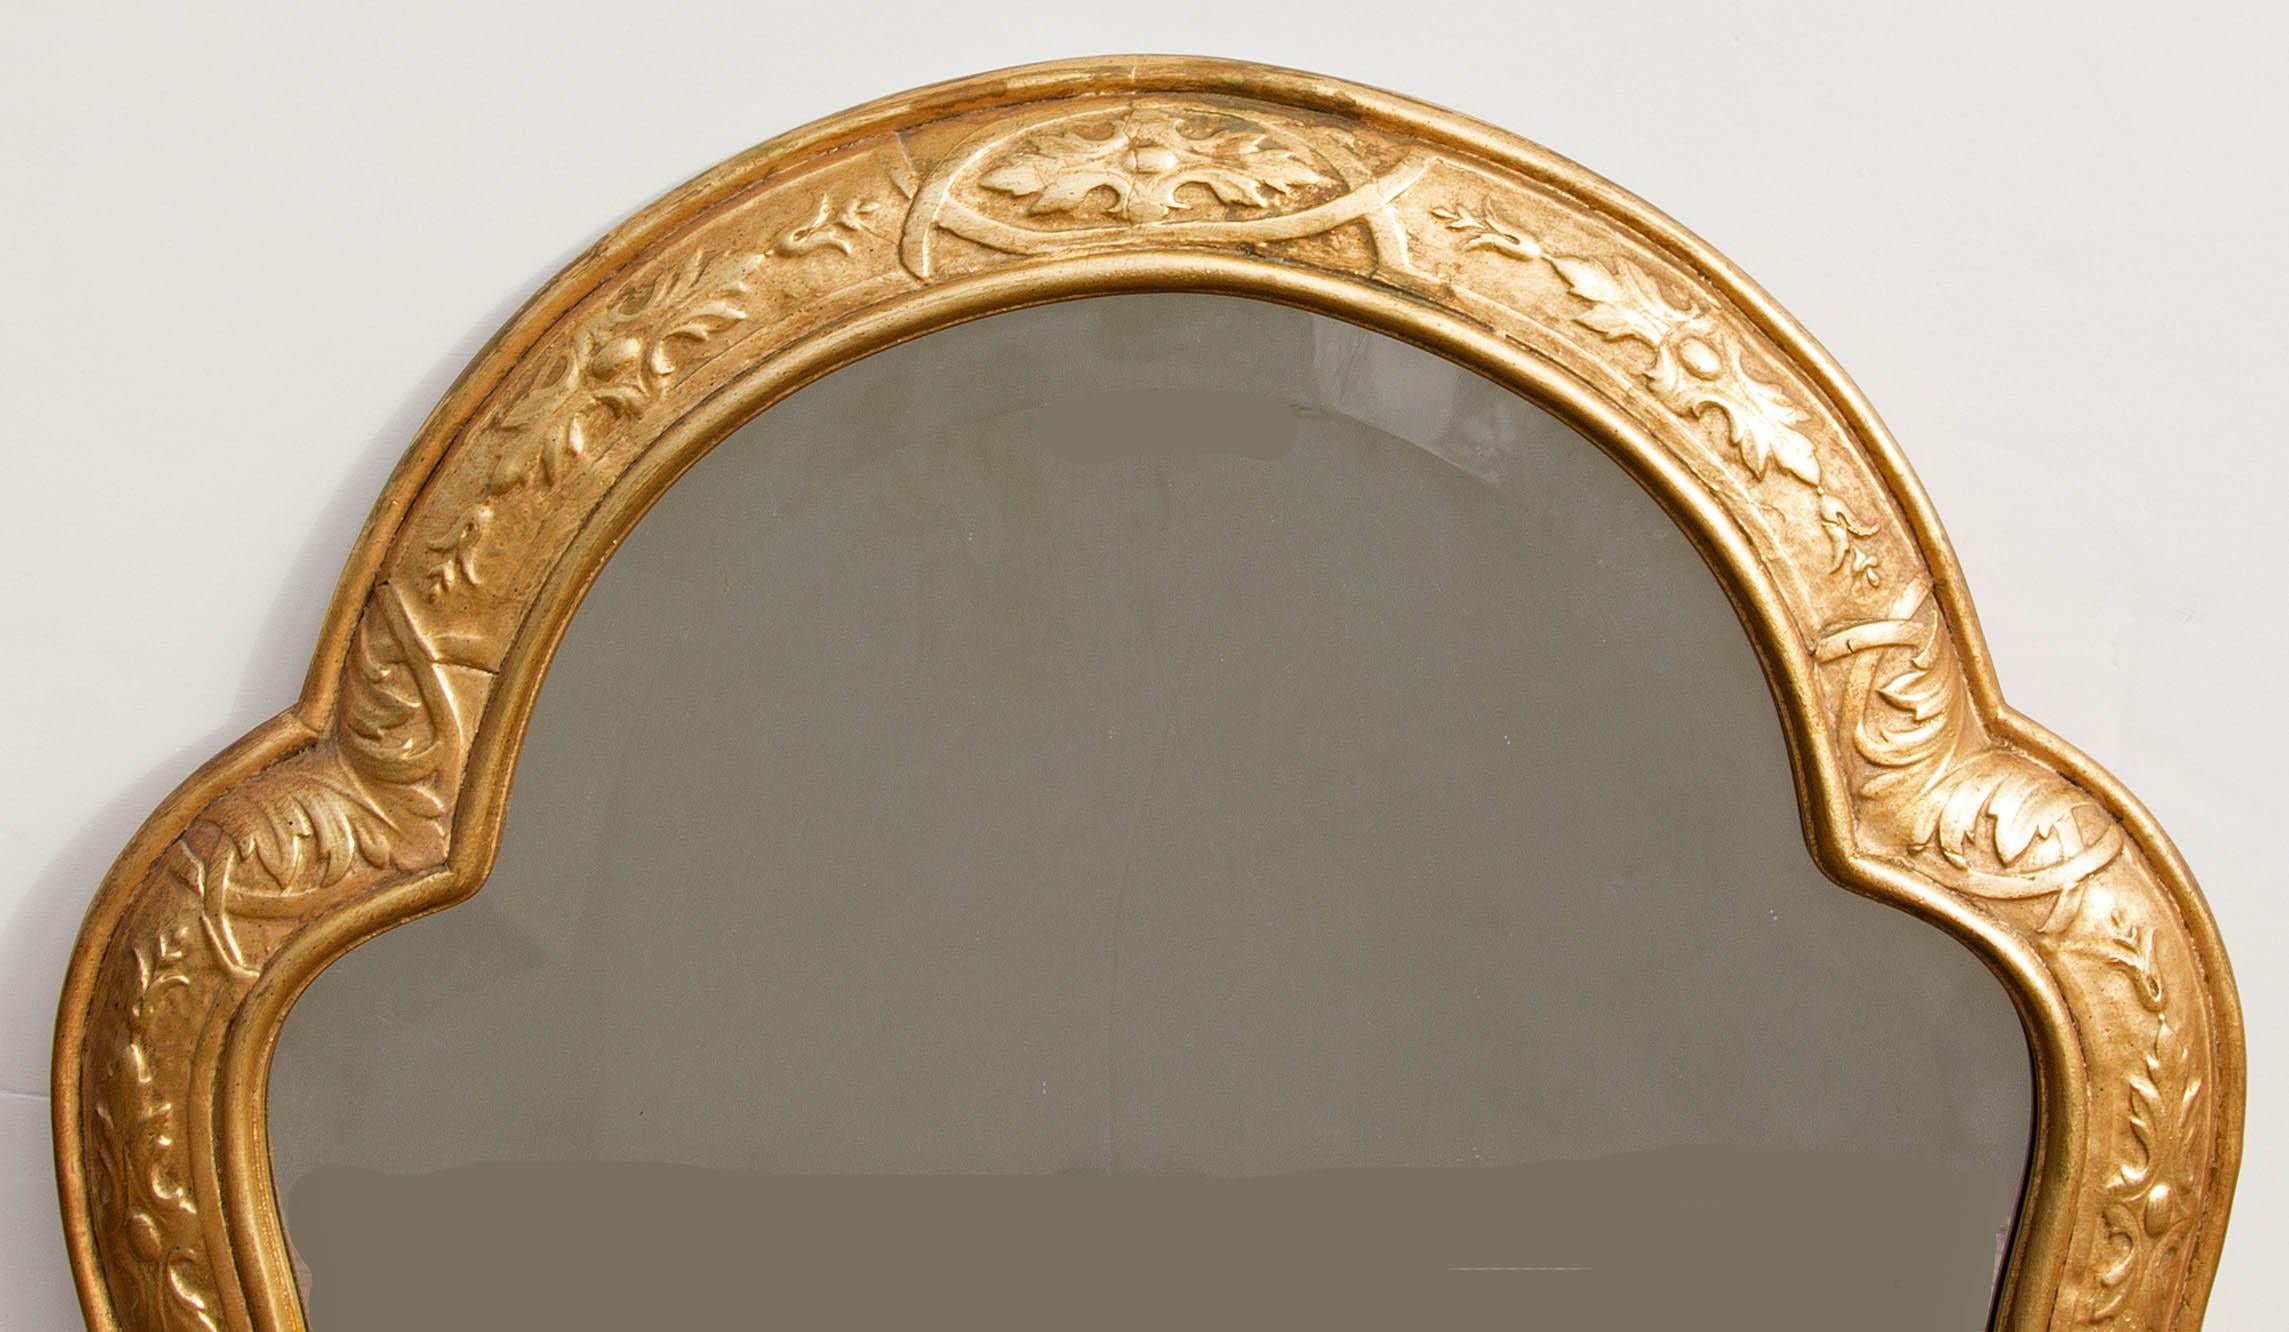 Carved and gilt beveled glass mirror. In the Moresque style.
US shipping $375.